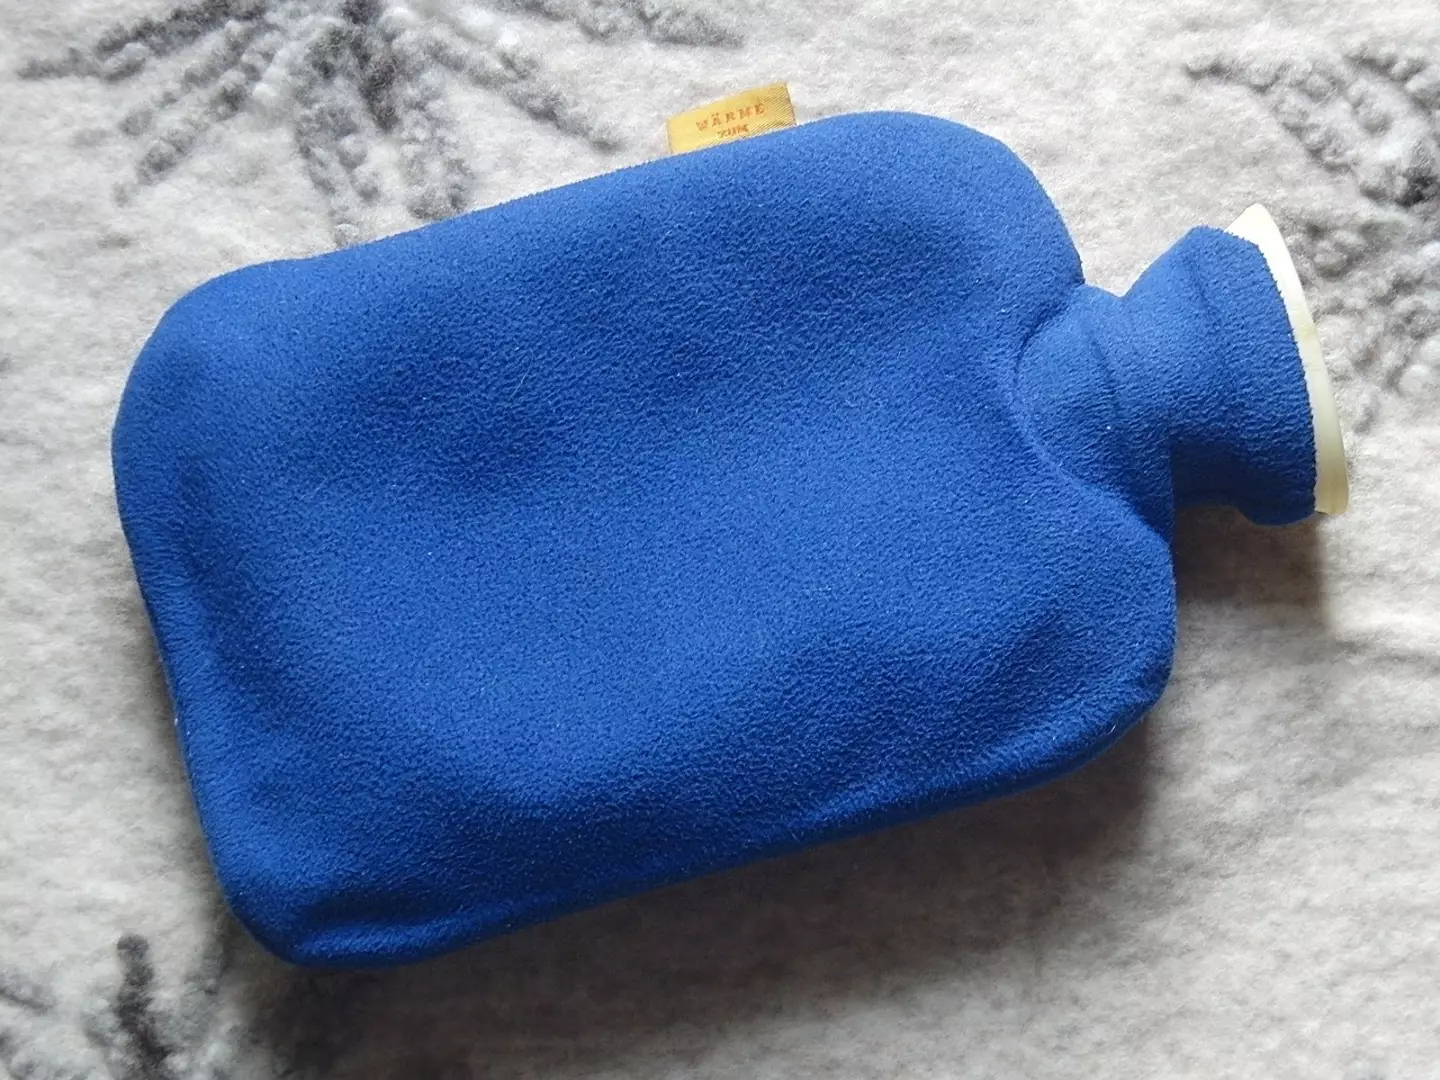 Hot water bottles are a winter staple for many people.